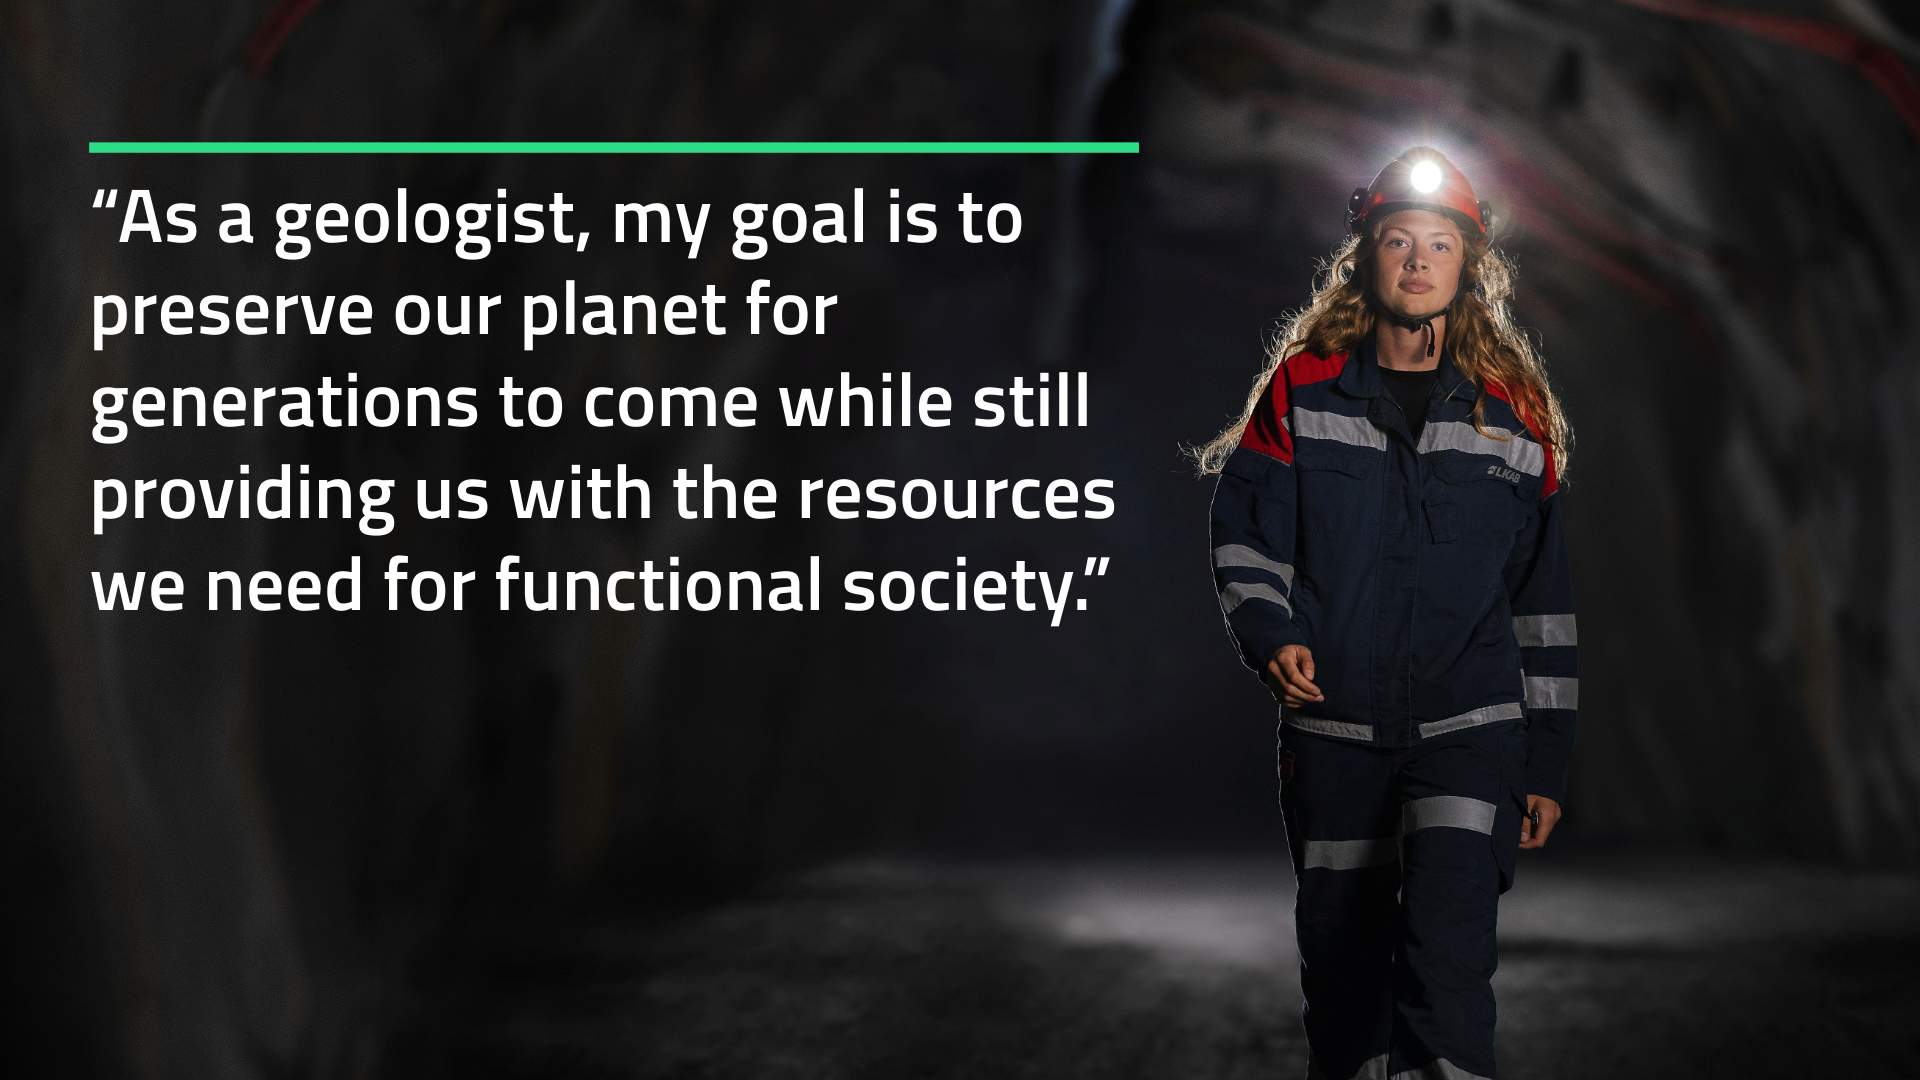 Woman in safety clothes under ground, with quote in the image: "As a geologist, my goal is to preserve our planet for generations to come while still providing us with the resources we need for functional society." 